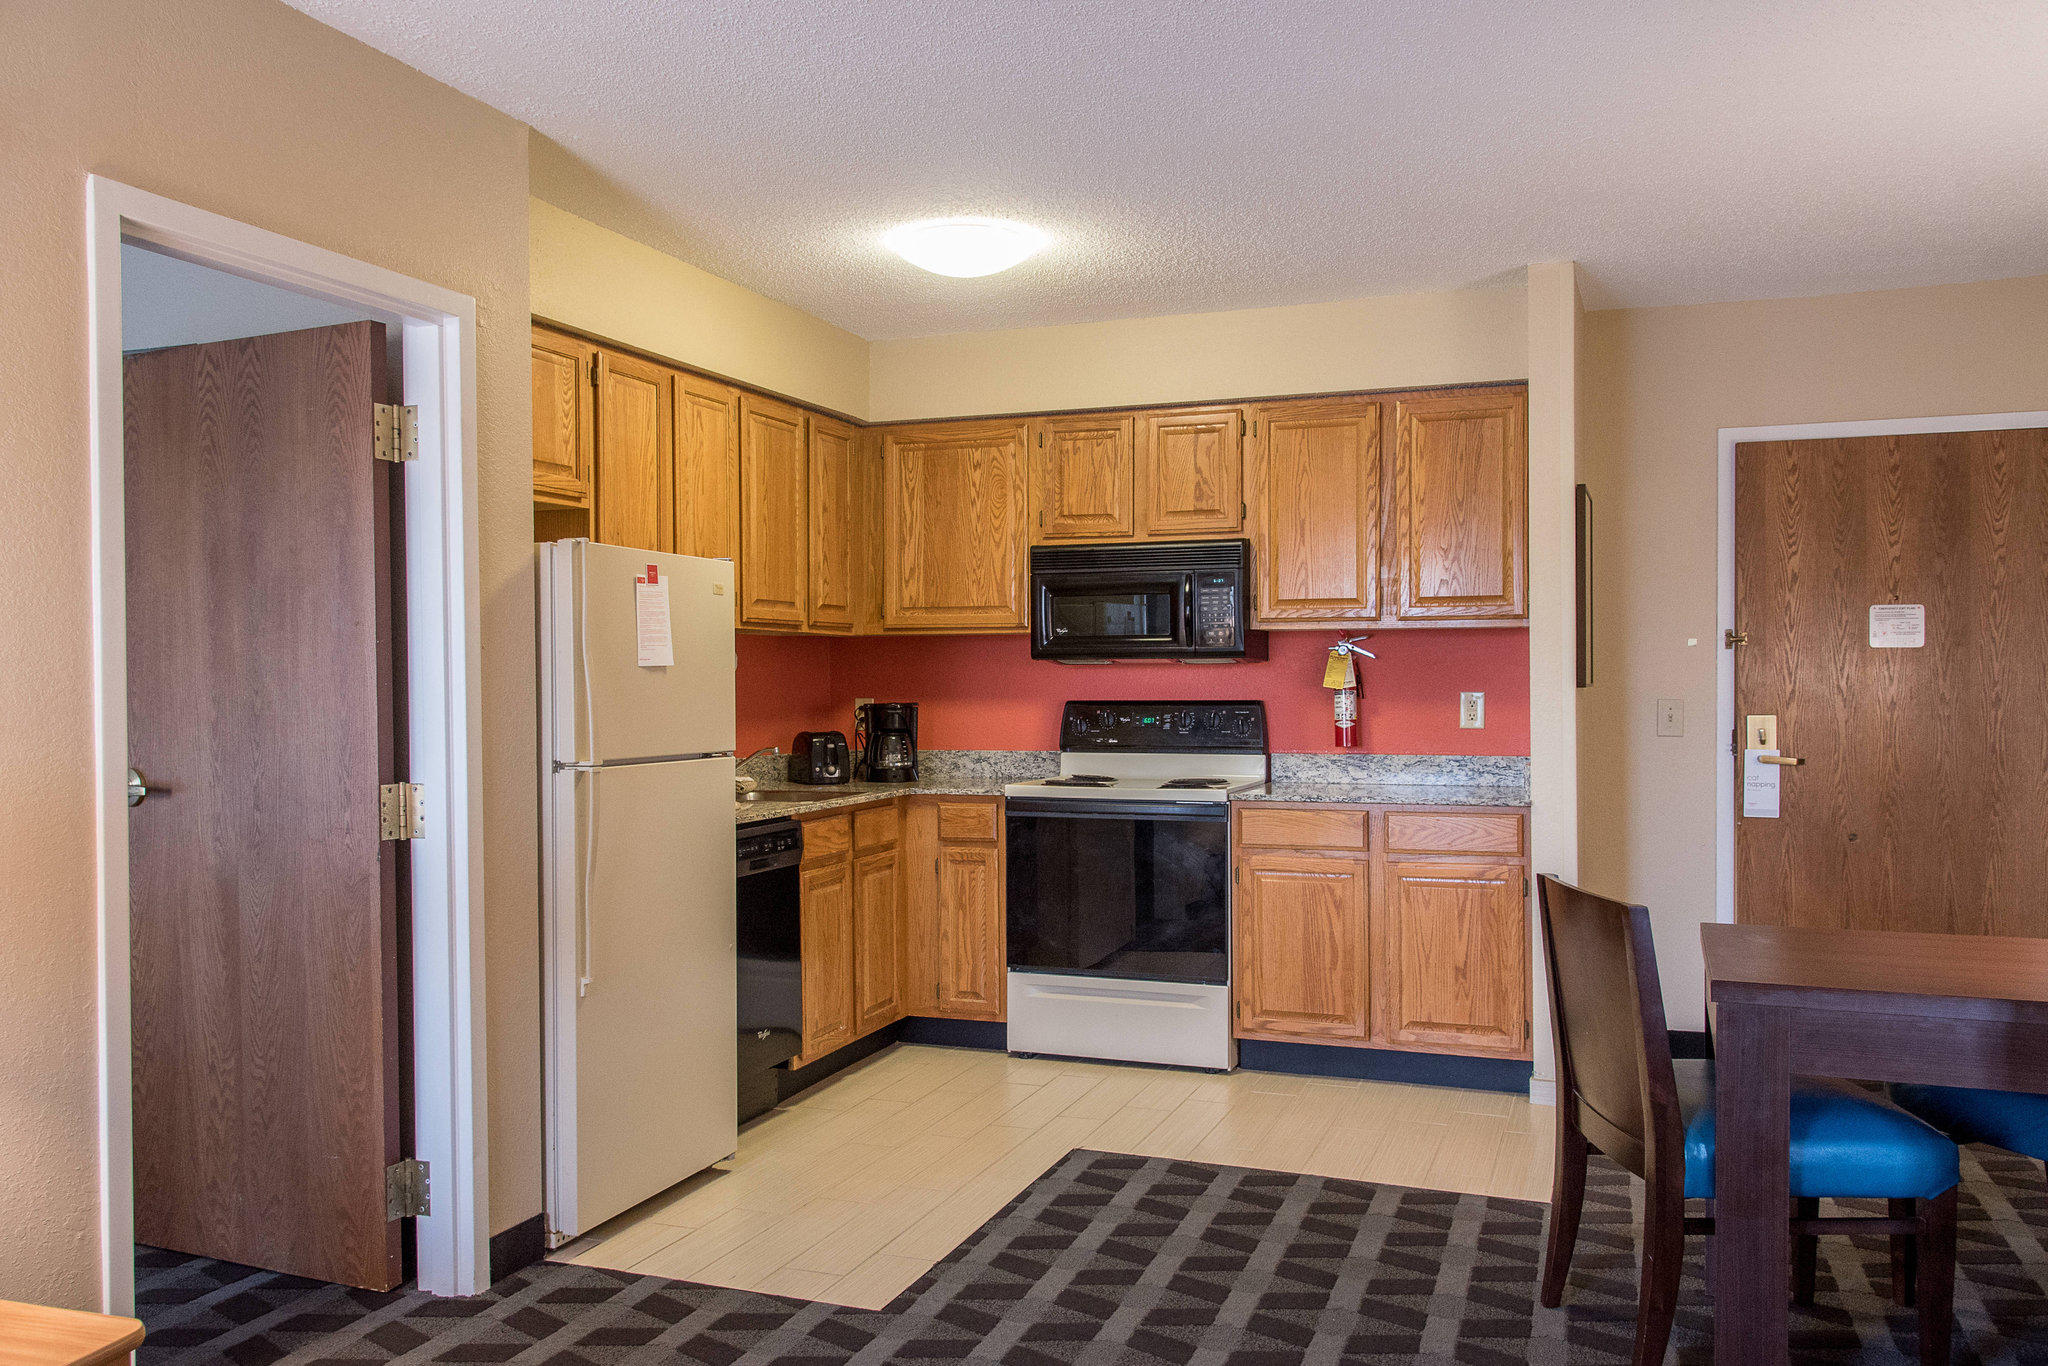 TownePlace Suites by Marriott Lafayette Photo